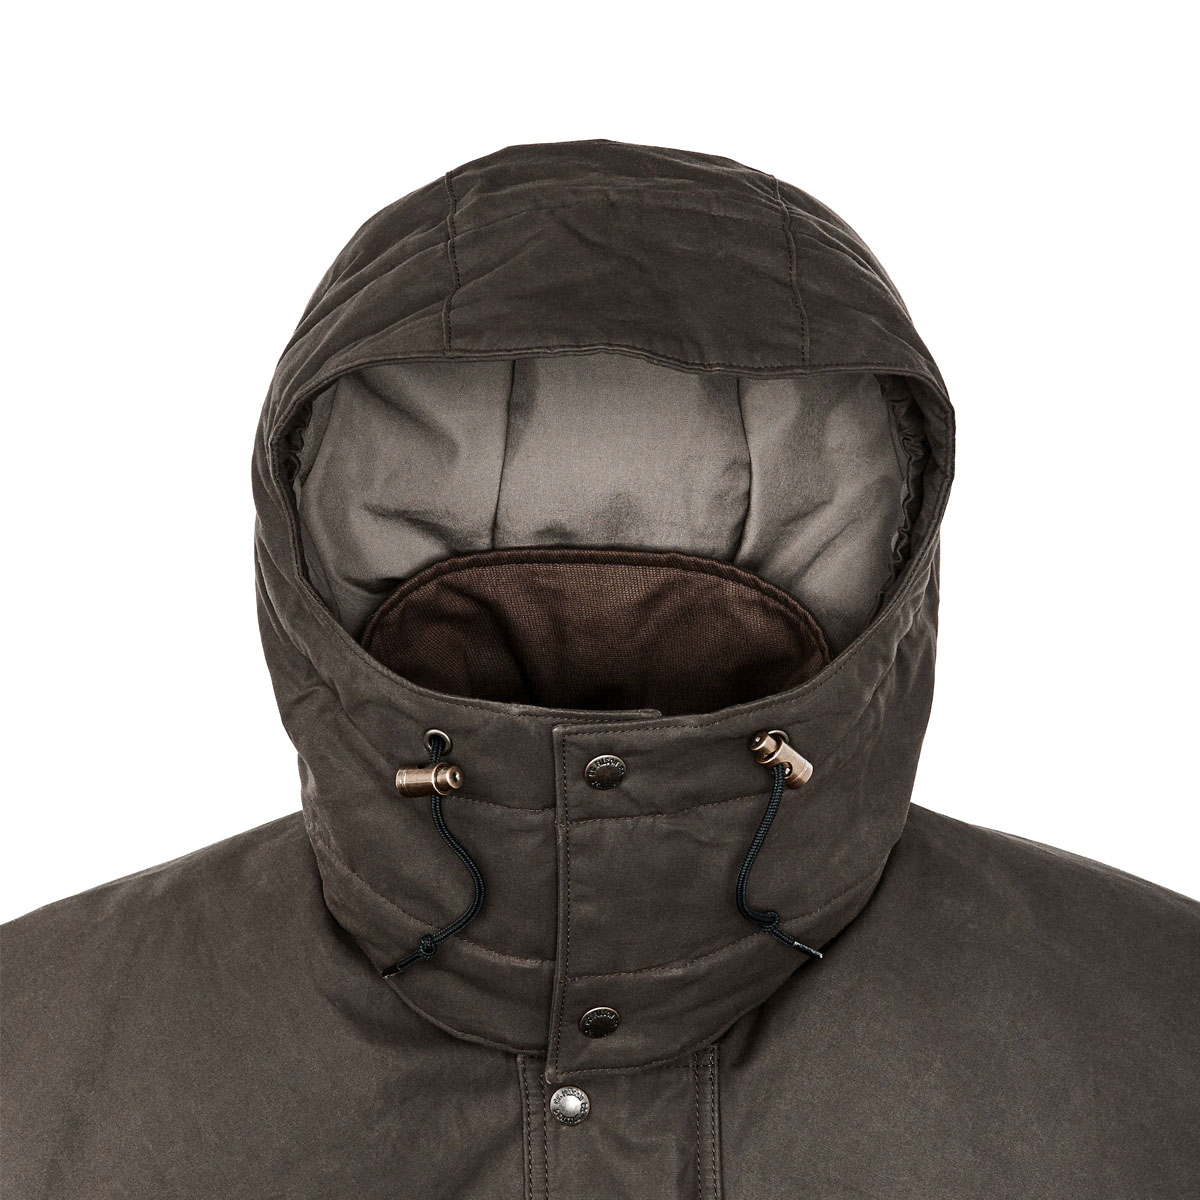 Filson Ranger Insulated Field Jacket, Removable-hood-insulated-with-60g-PrimaLoft-Gold